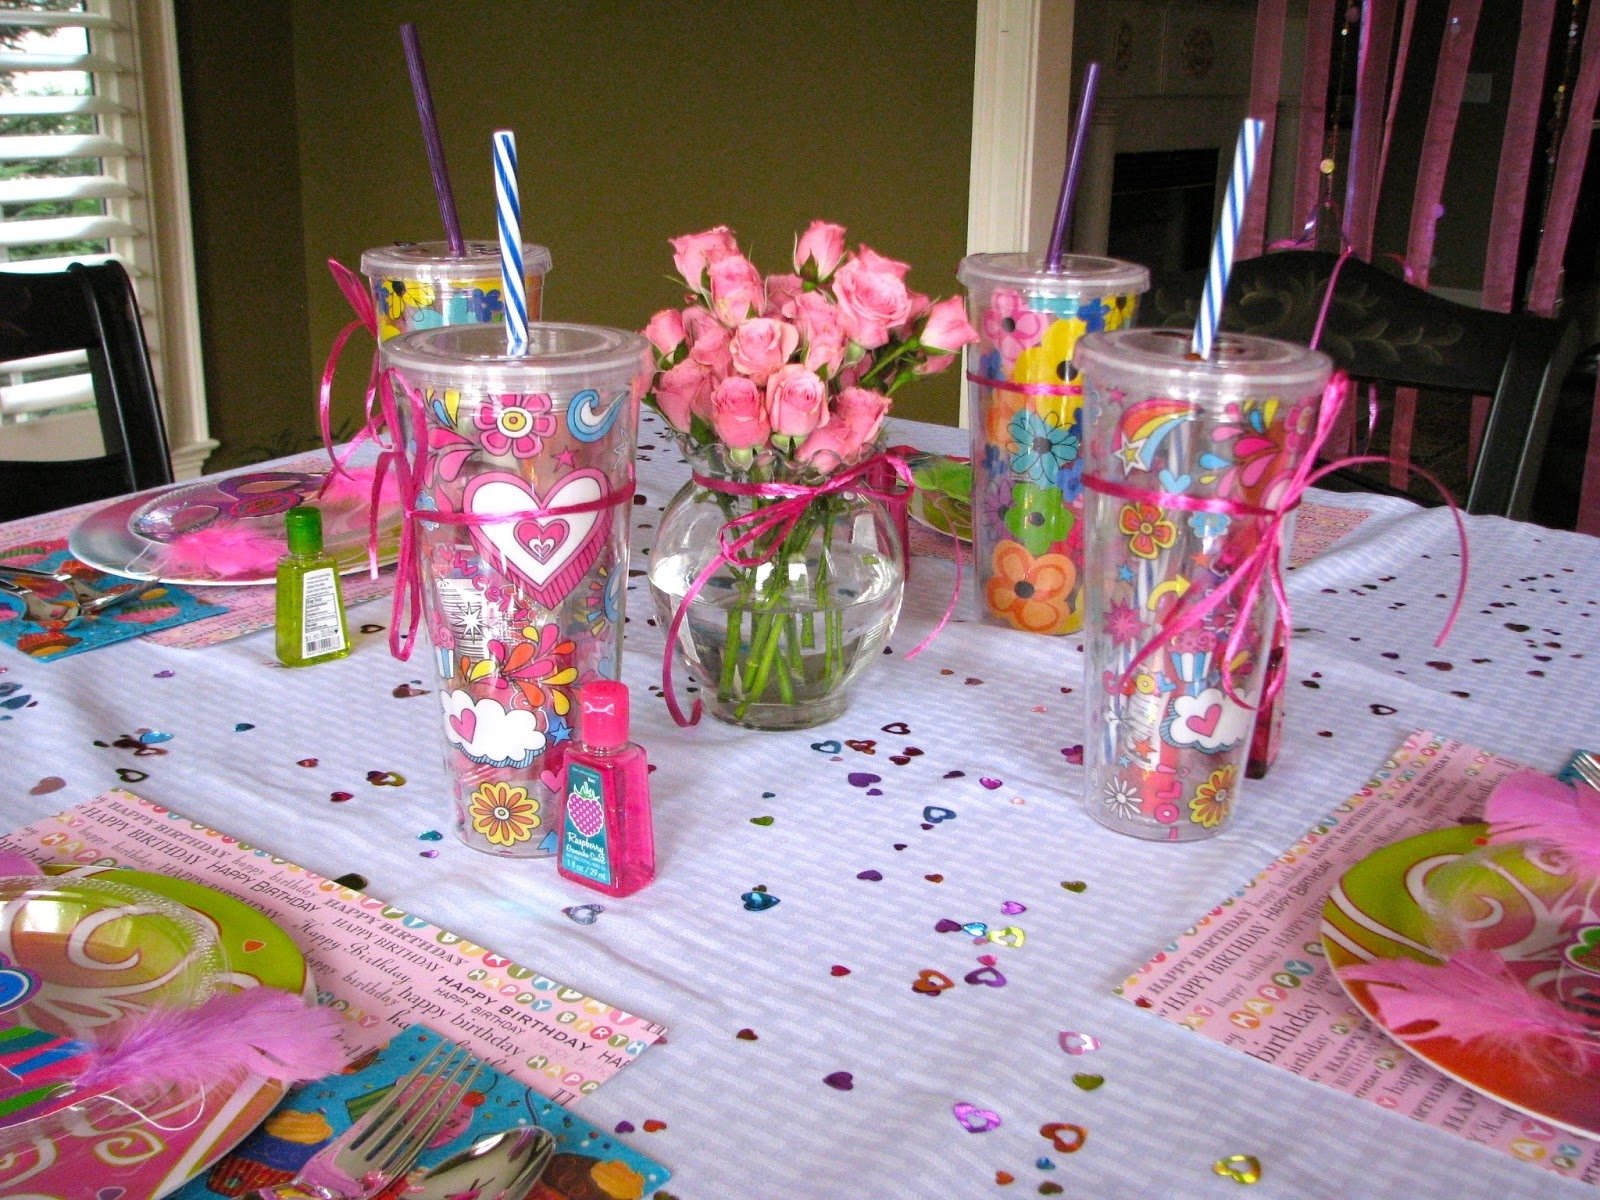 10 Famous 3 Year Old Girl Birthday Party Ideas homemadeville your place for homemade inspiration girls birthday 1 2022